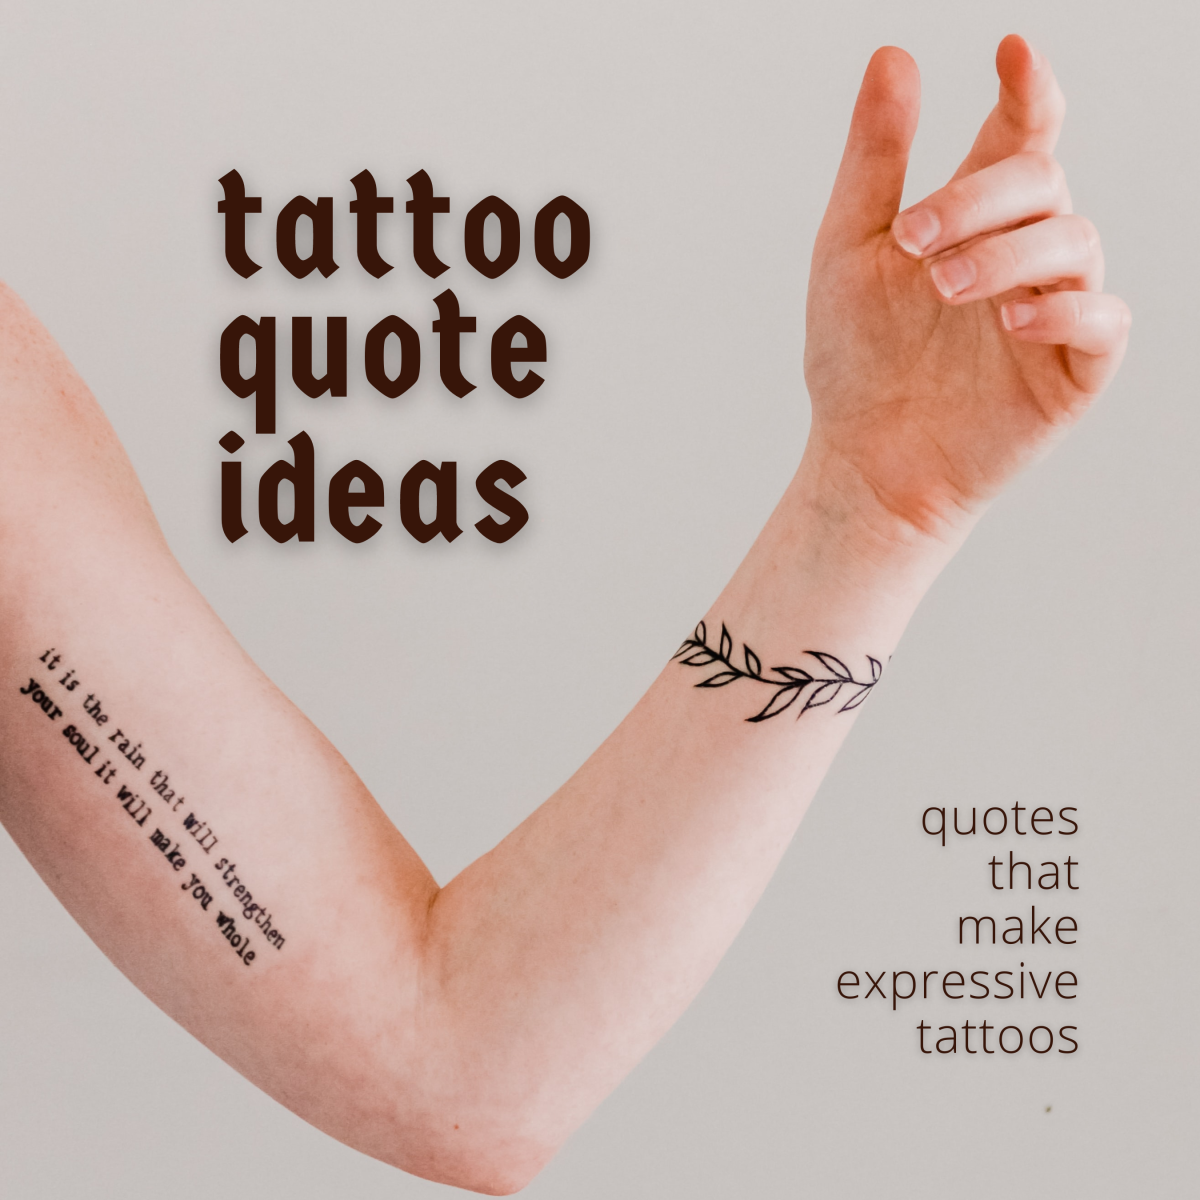 50 Best Tattoo Quotes, Words, and Sayings